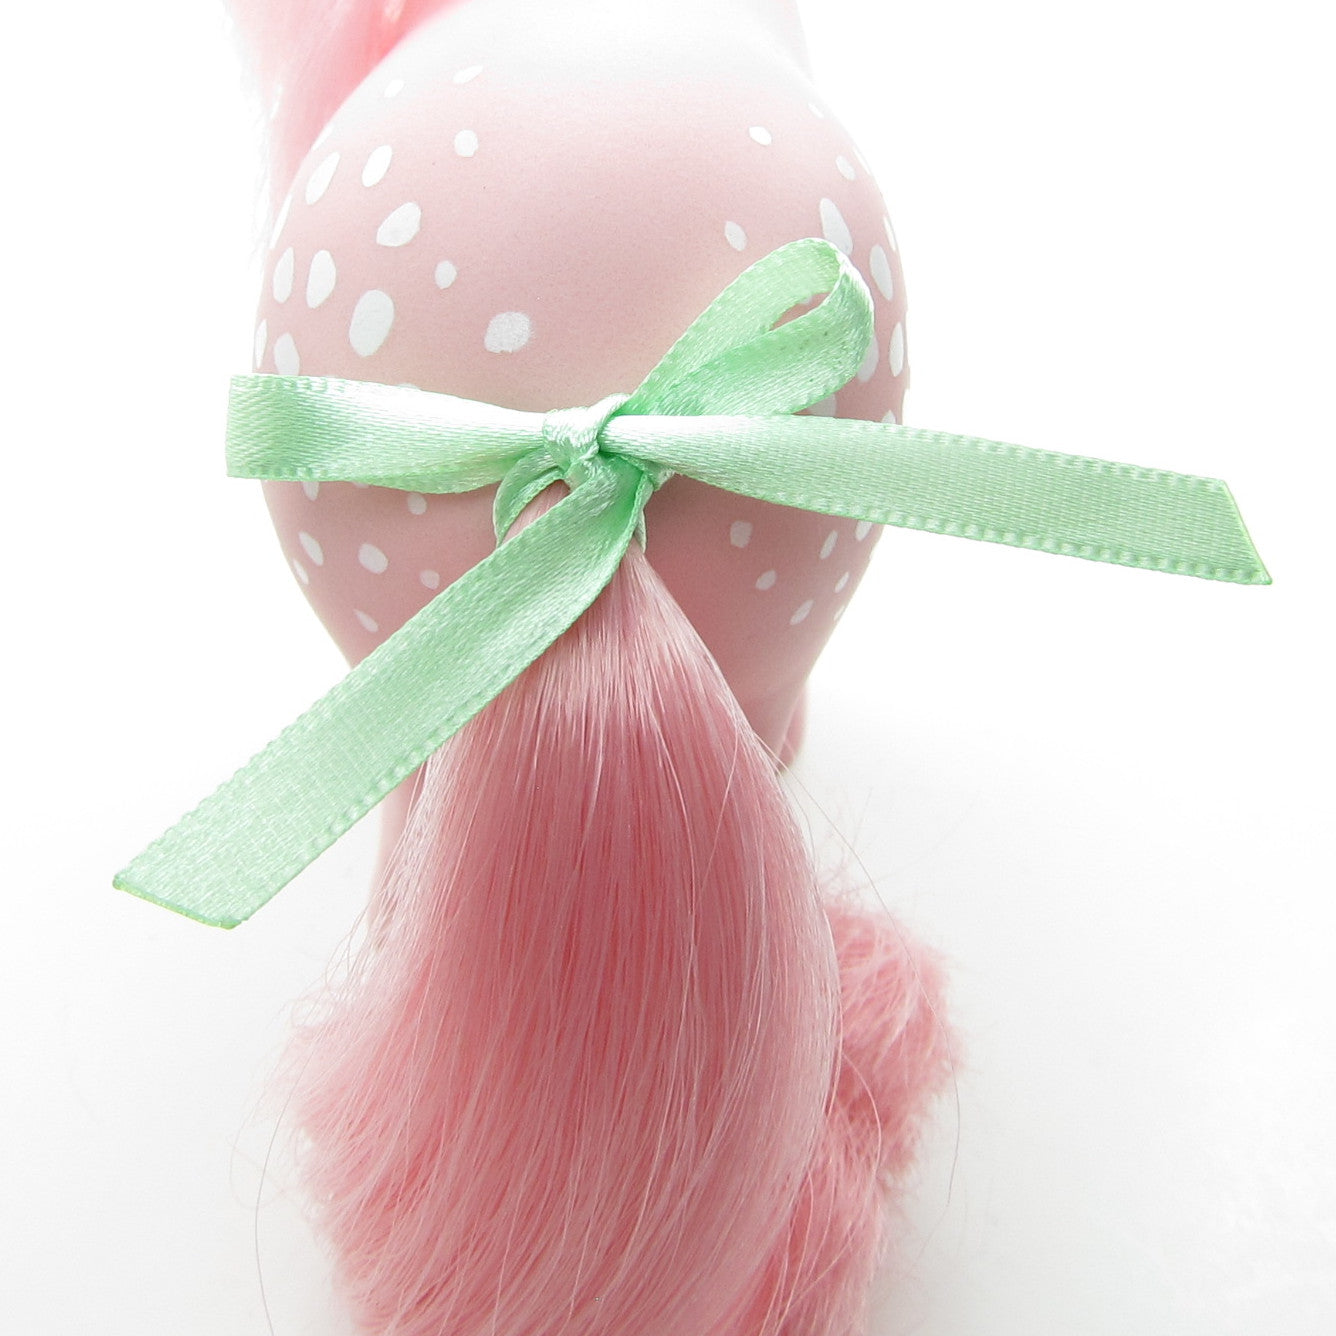 Replacement Pony Hair Ribbons for G1 My Little Ponies - Green Shades